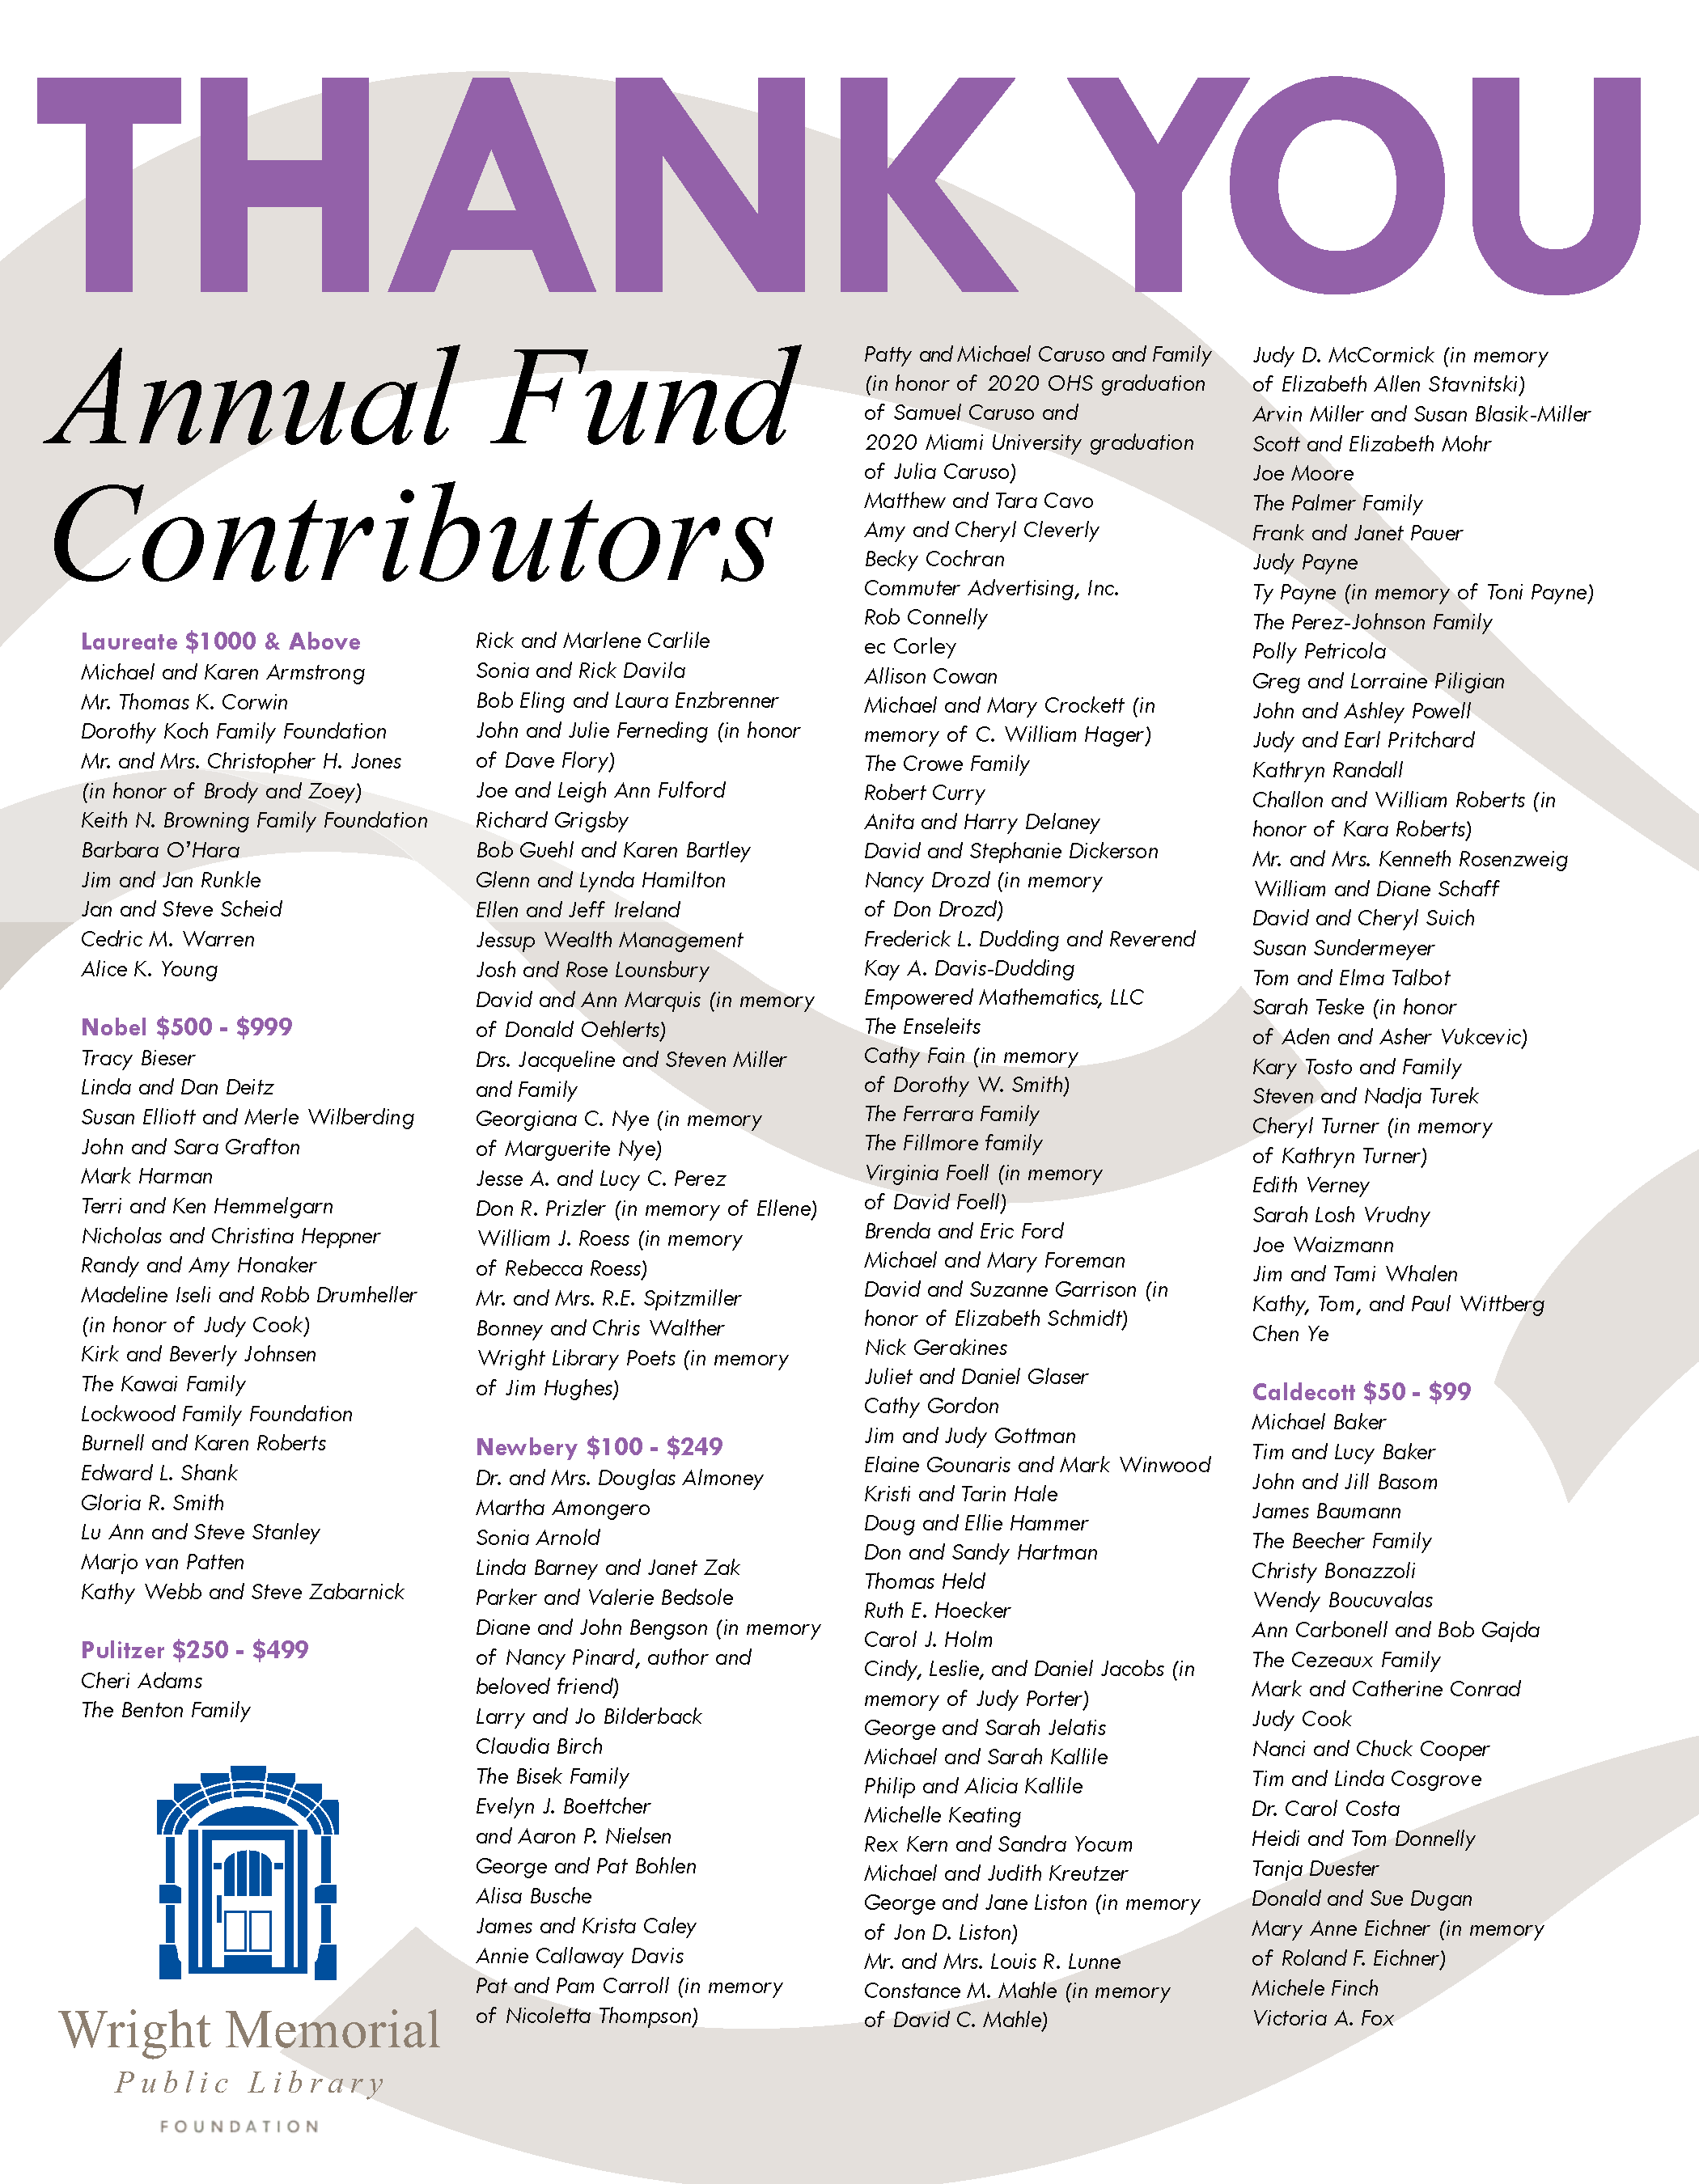 Thank you ad for 2020 annual and capital campaign donors